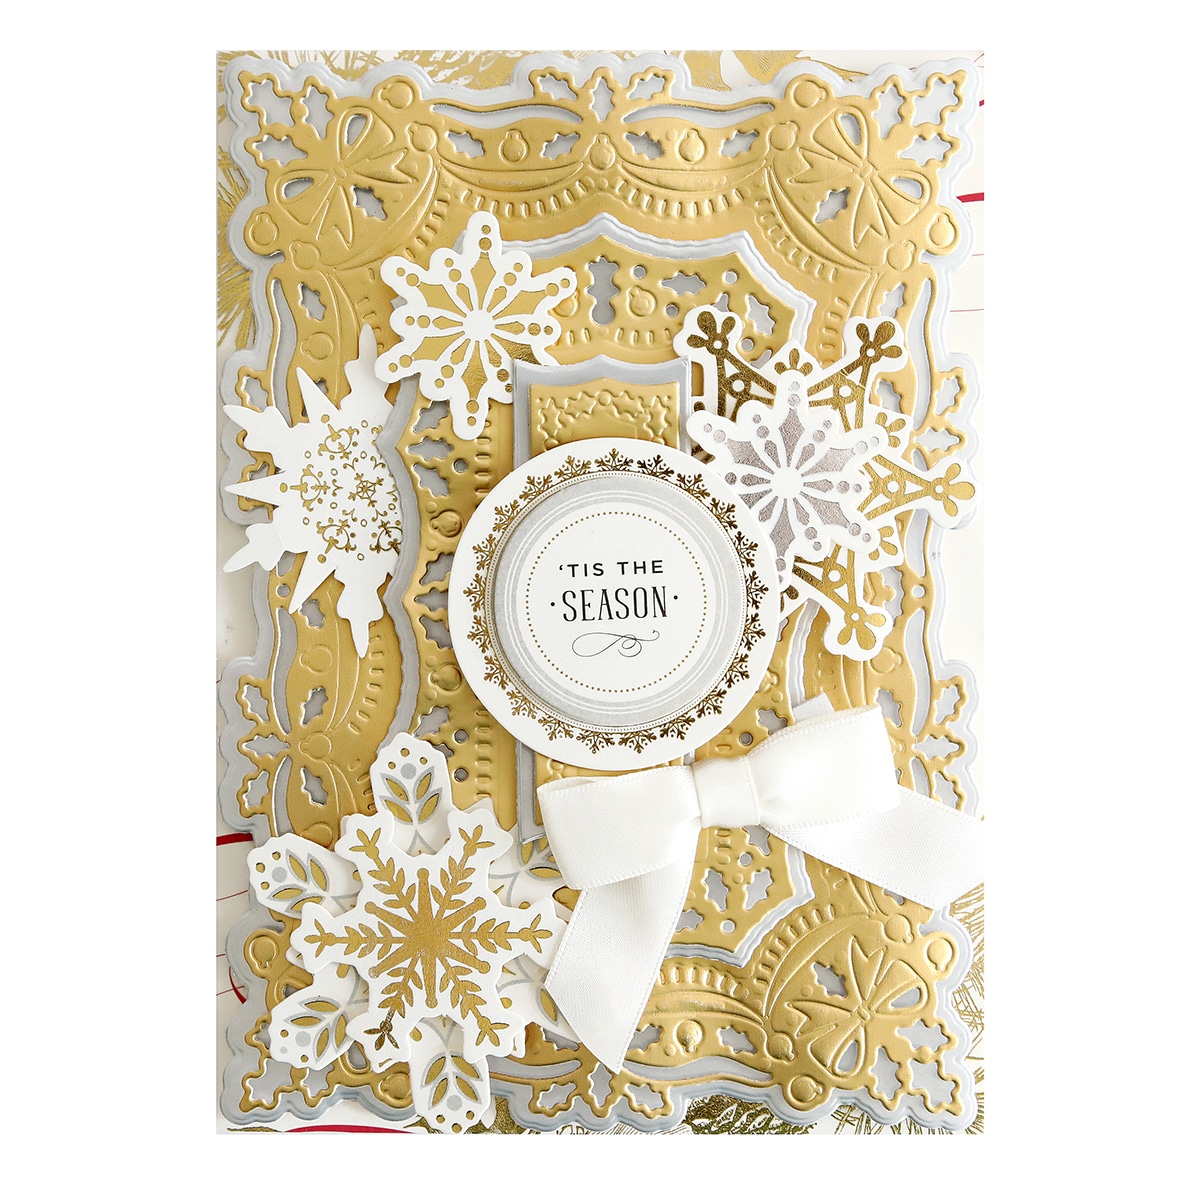 A gold and white card with snowflakes on it.